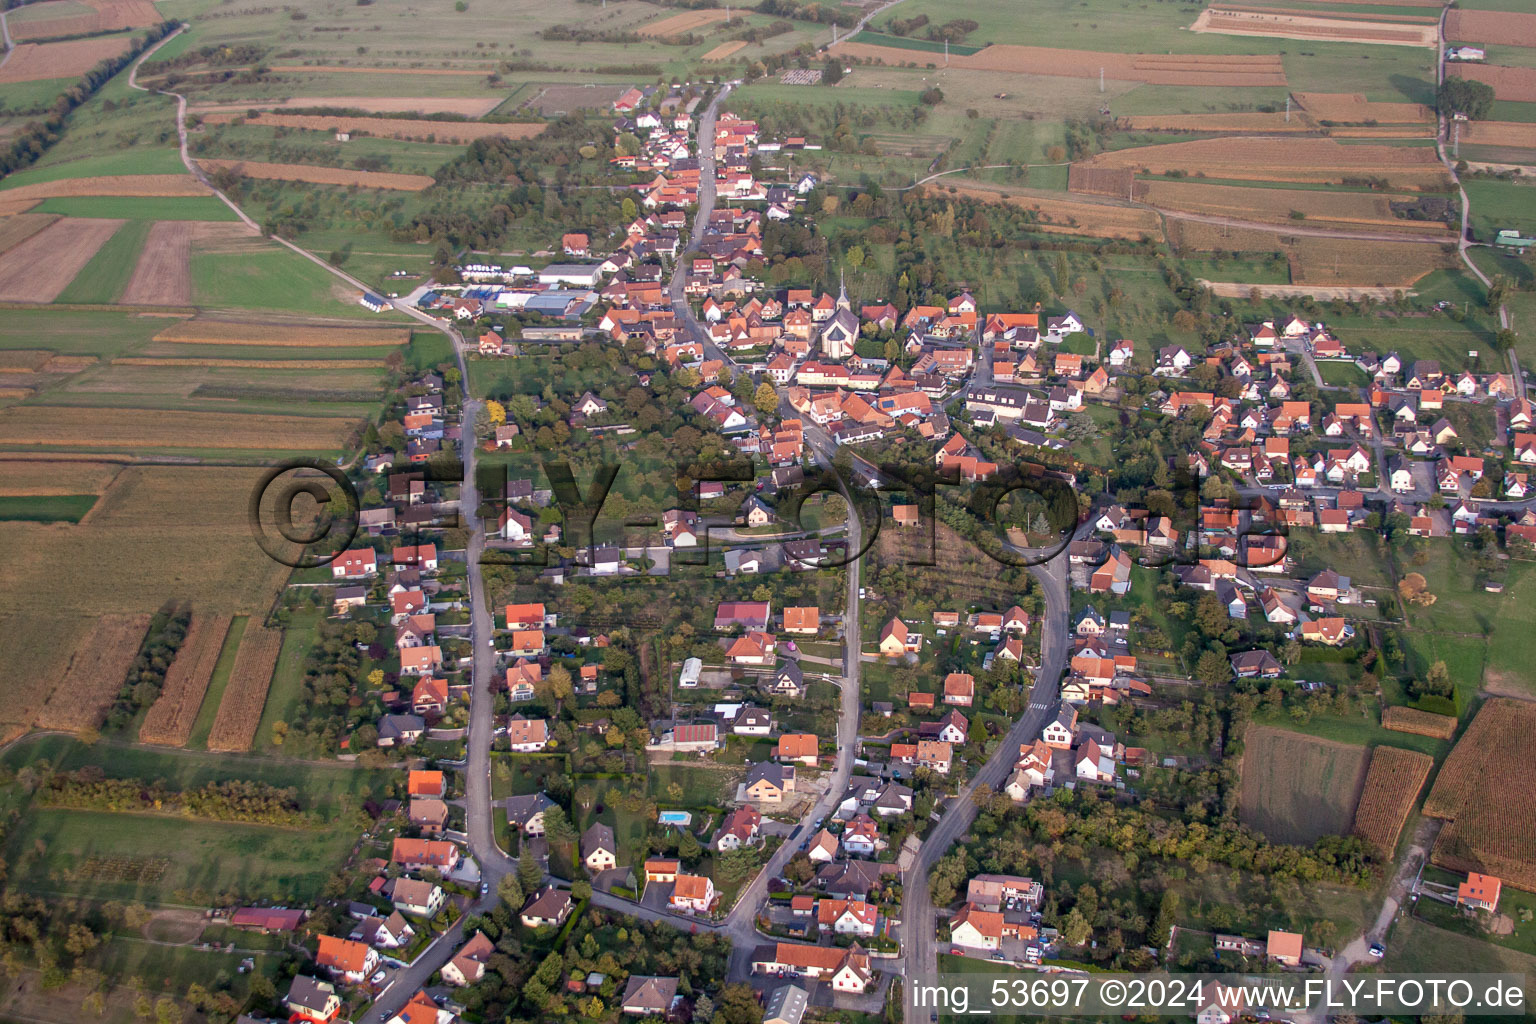 Oblique view of Village - view on the edge of agricultural fields and farmland in Gunstett in Grand Est, France